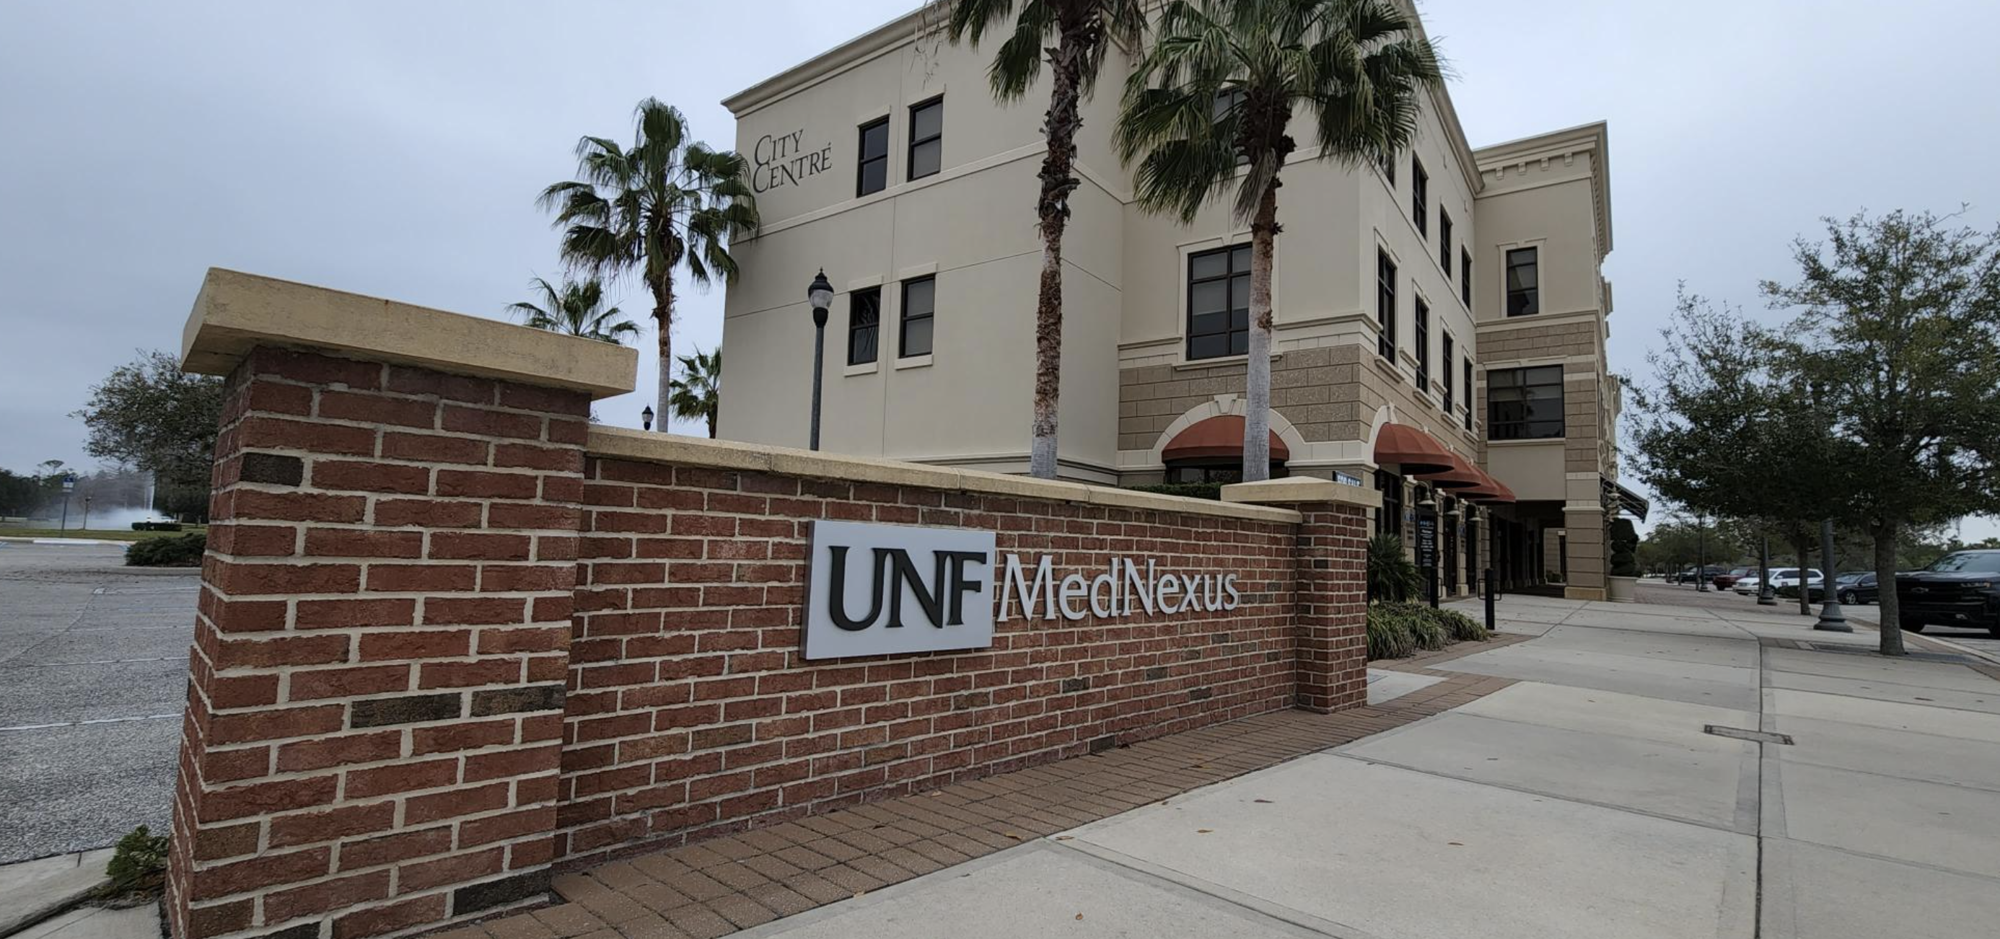 The University of North Florida MedNexus program site in Town Center, as shown in a city staff presentation at a March 8 City Council workshop.